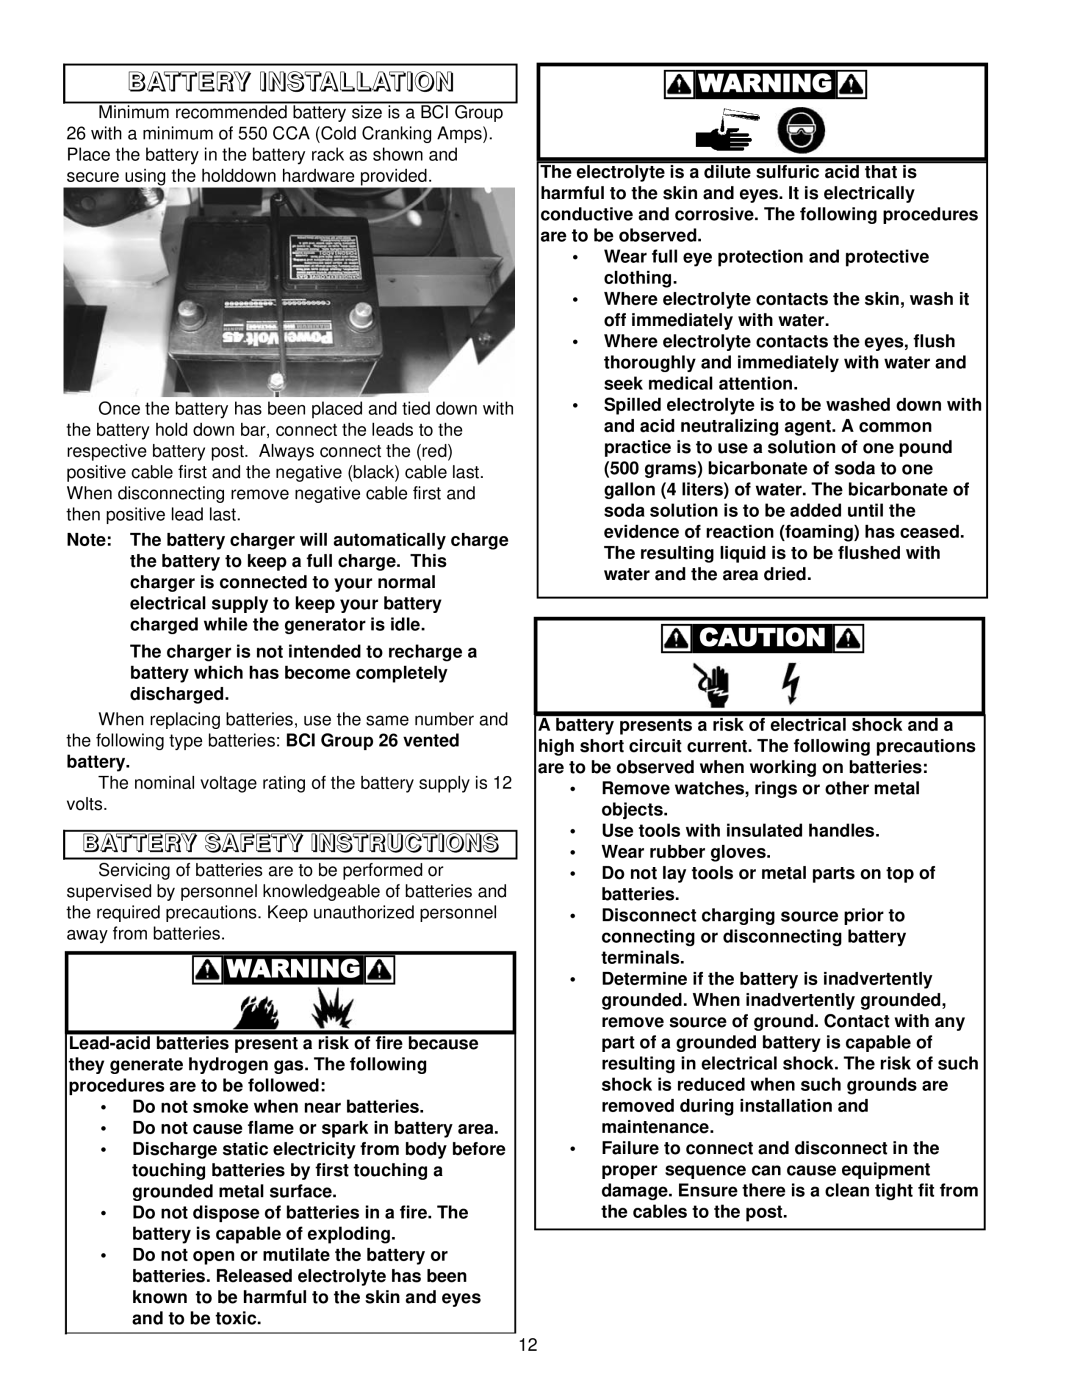 Coleman PM402511 owner manual Battery Installation, Battery Safety Instructions 